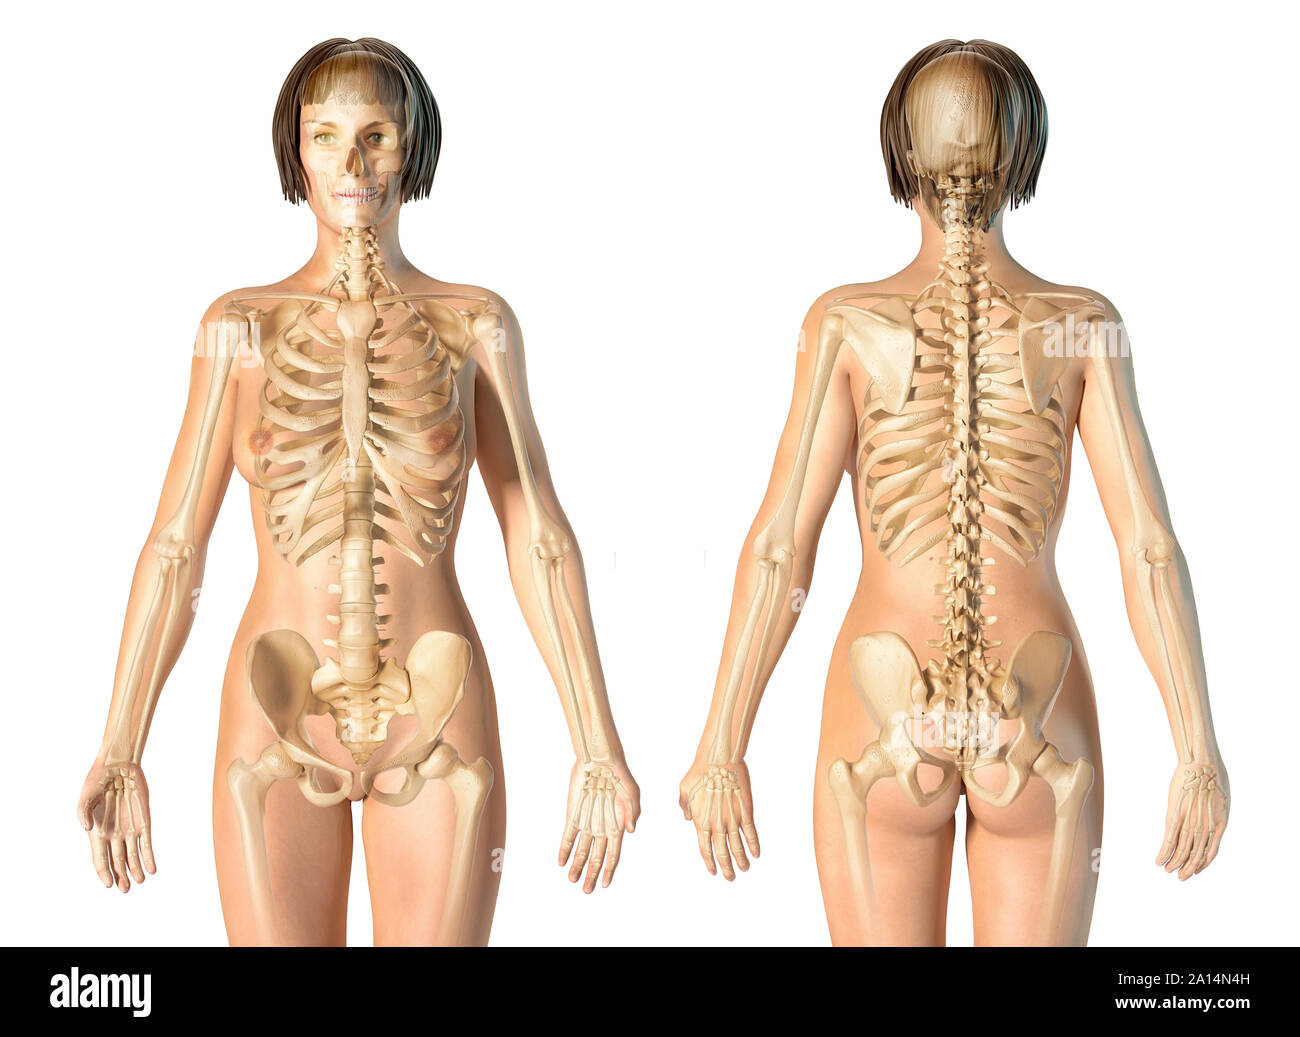 Female skeletal system, front and rear views, on white background. Stock Photo